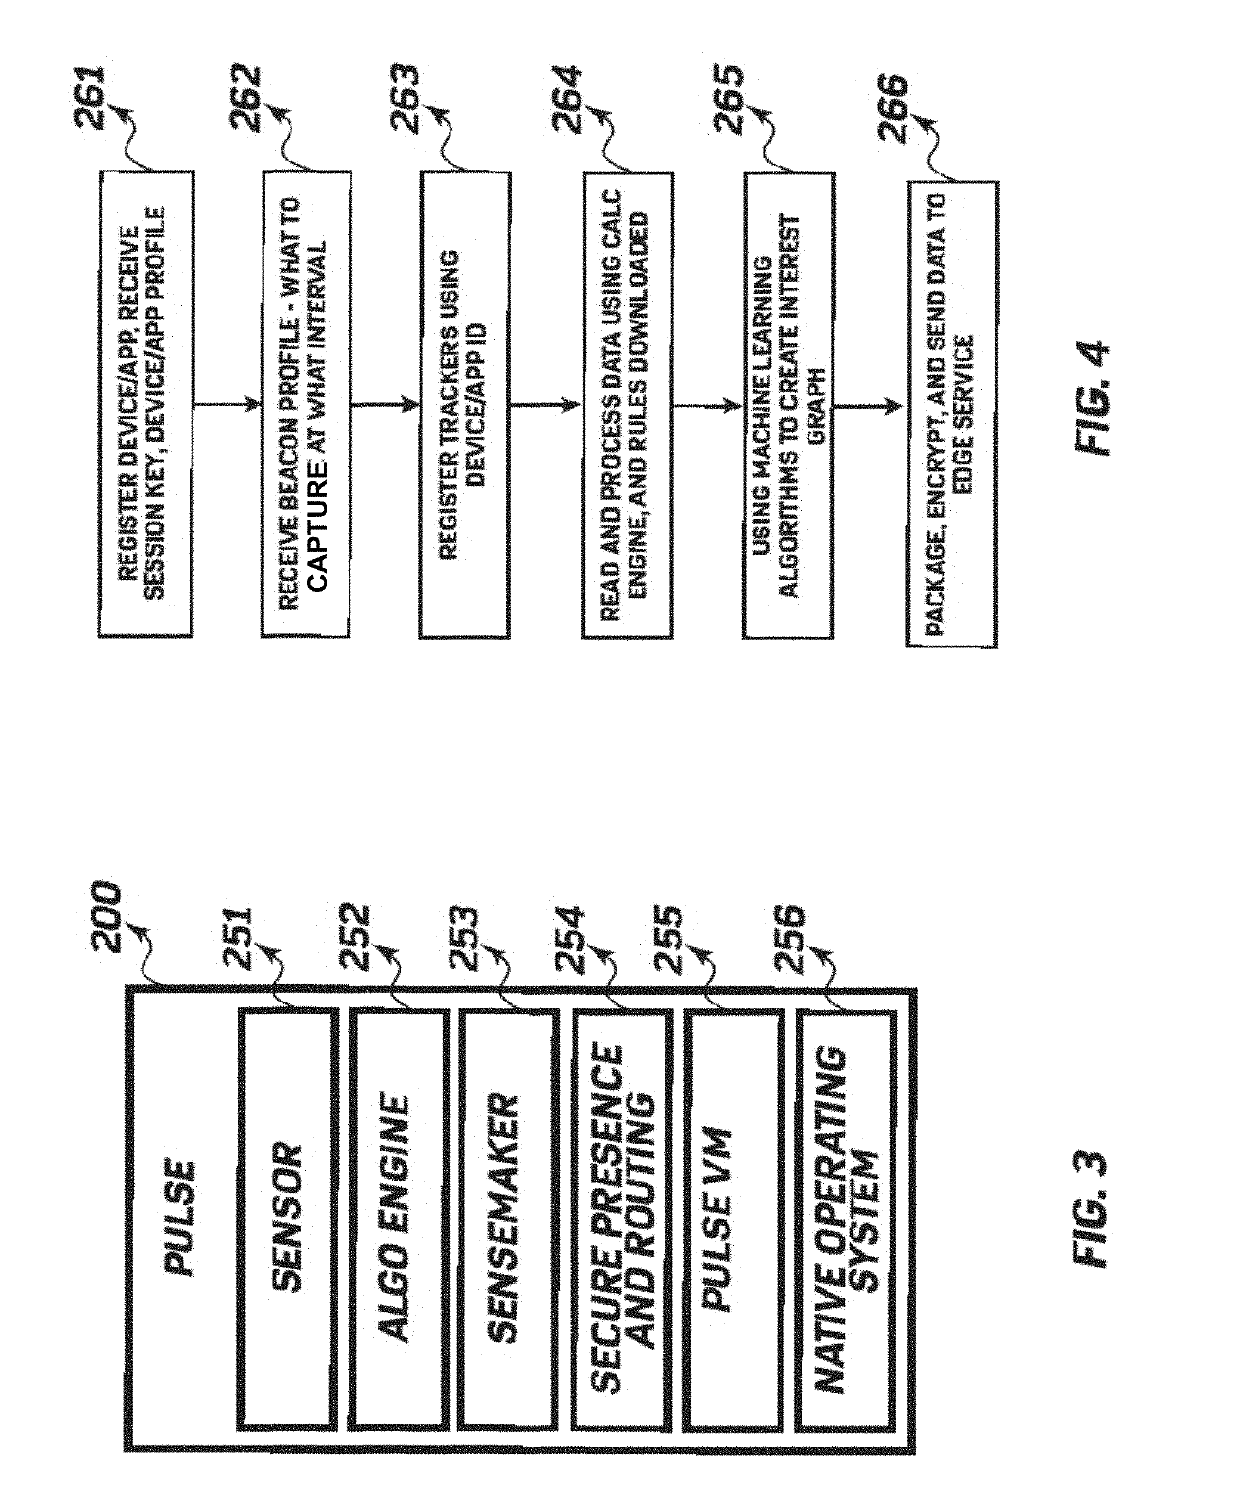 System and method for using a data genome to identify suspicious financial transactions